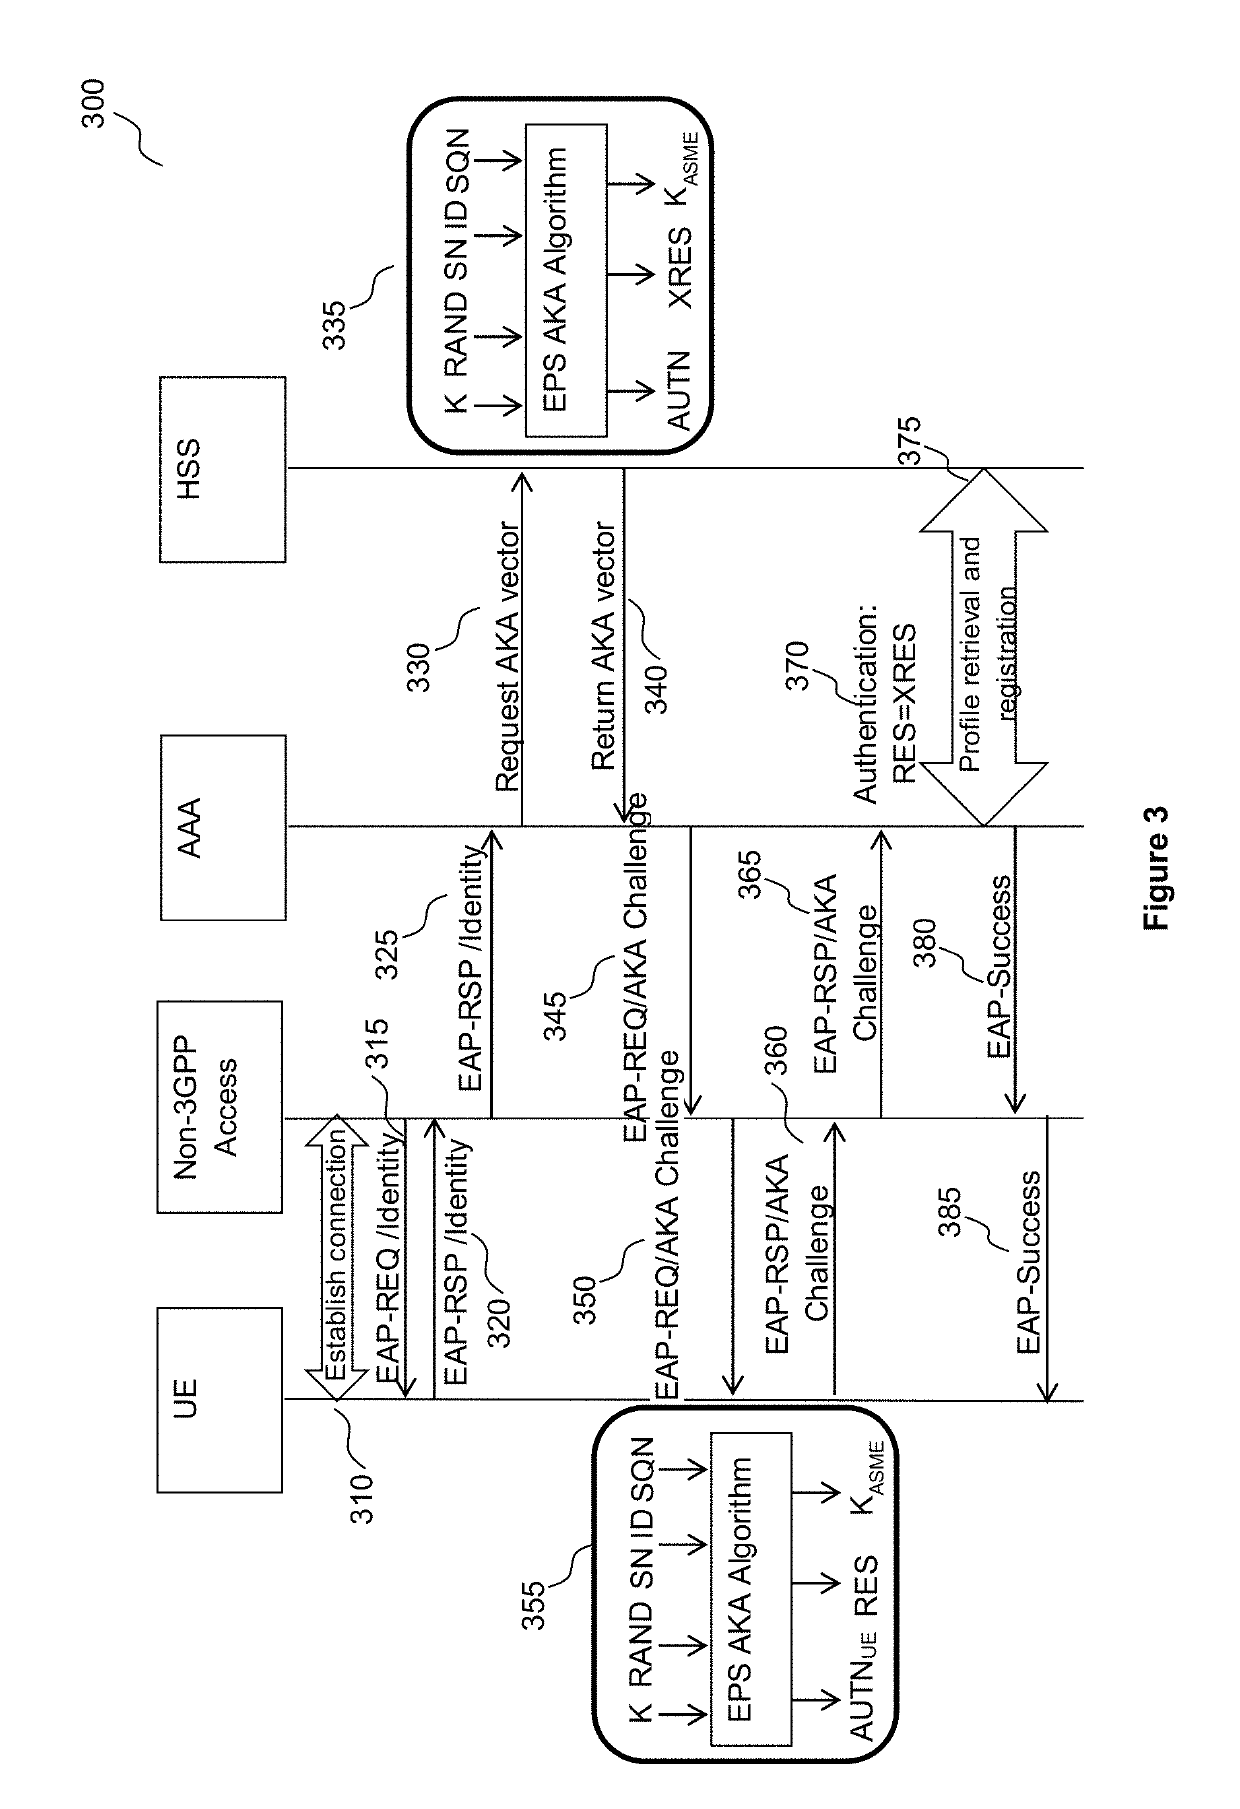 Unified authentication for heterogeneous networks